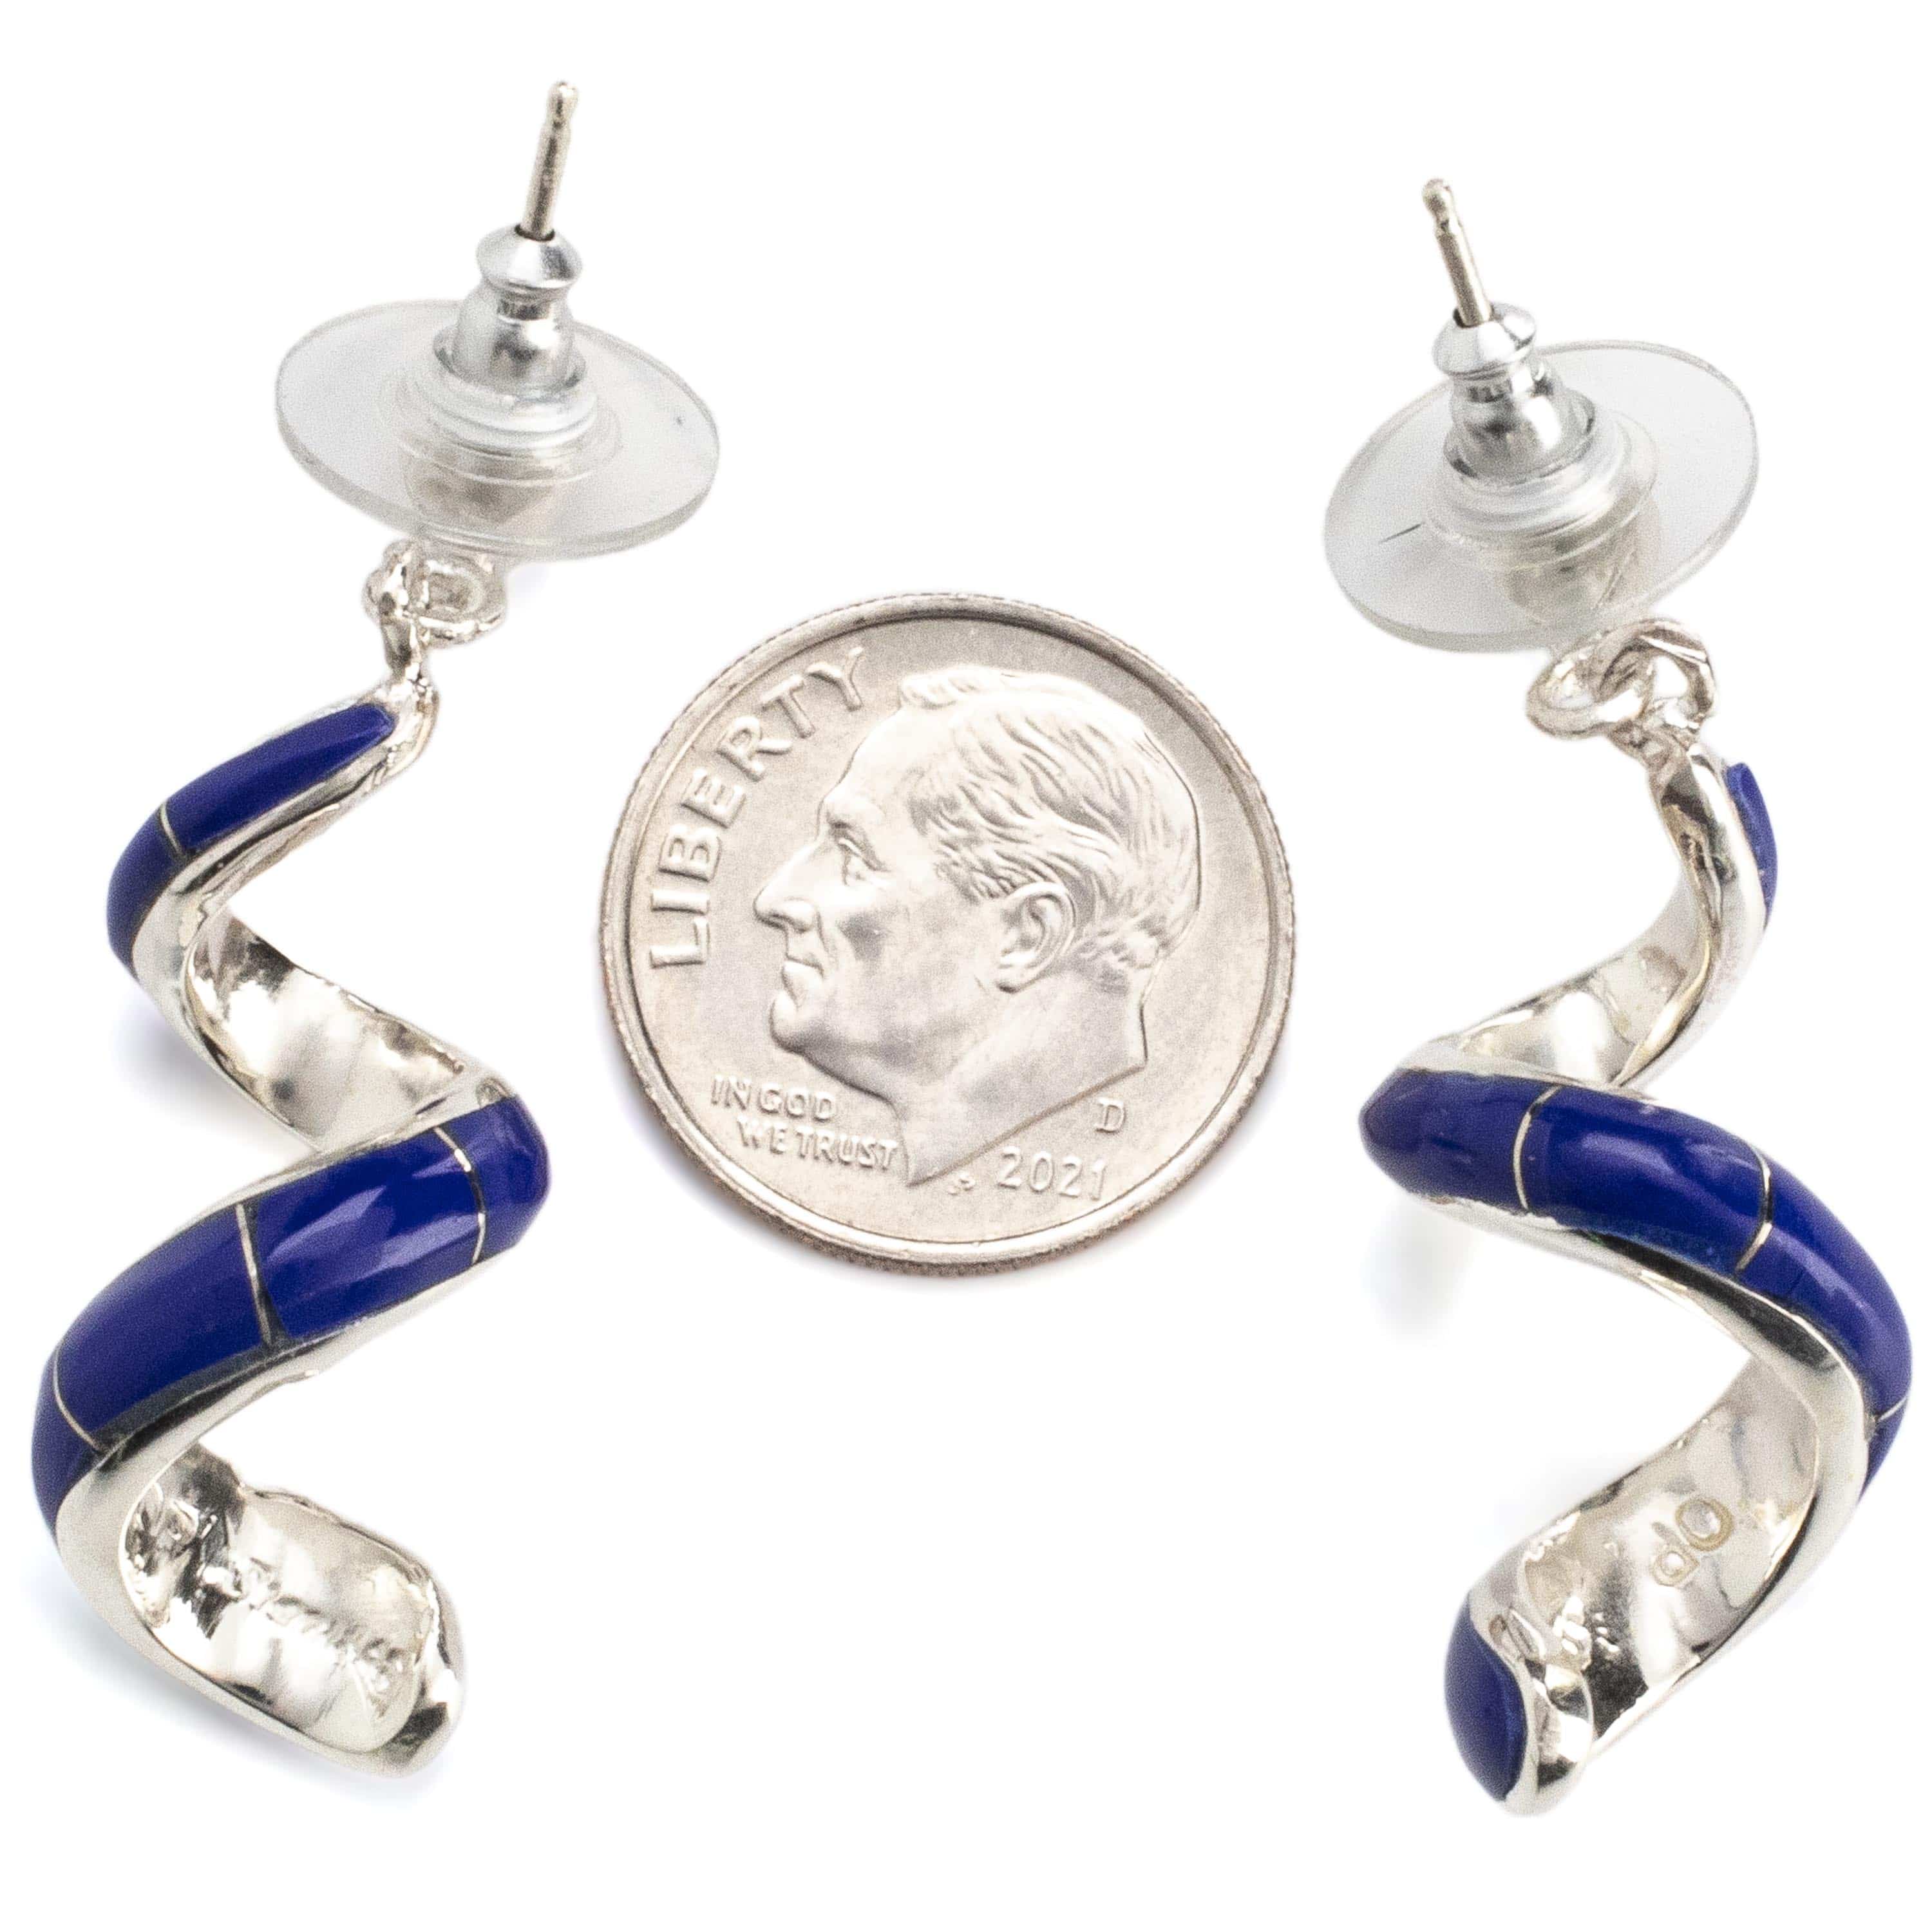 Kalifano Southwest Silver Jewelry Lapis Spiral Dangle Earrings Handmade with Sterling Silver and Opal Accent NME.0416.LP